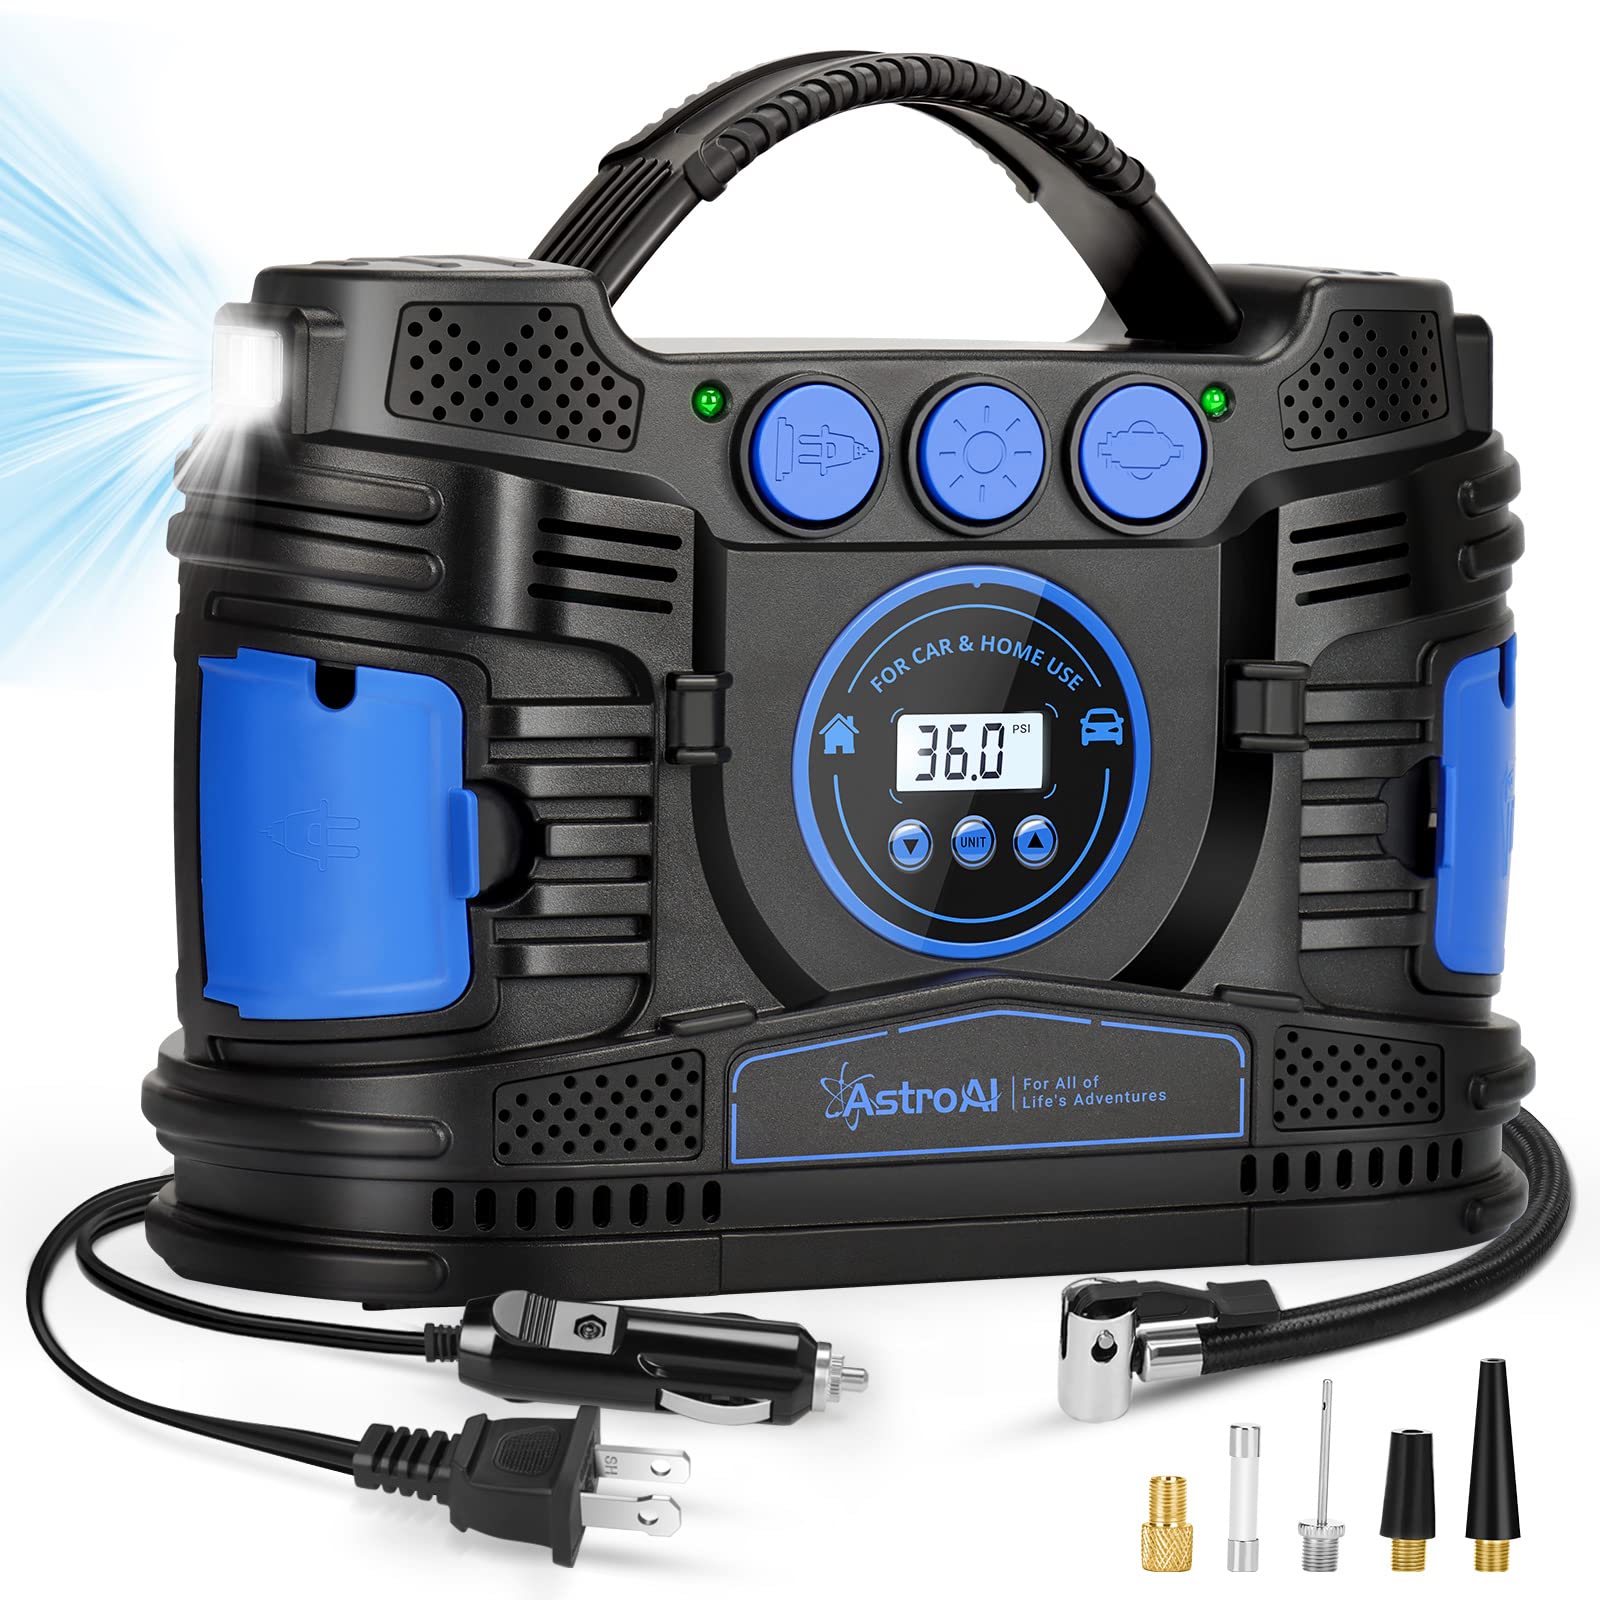 Book Cover AstroAI Air Compressor Tire Inflator, Portable DC/AC Air Pump for Car Tires, Dual Motor Air Compressor Tire Pump 120PSI with LED Light for Cars, Balls, Motorcycles, and Other Inflatables(Blue)